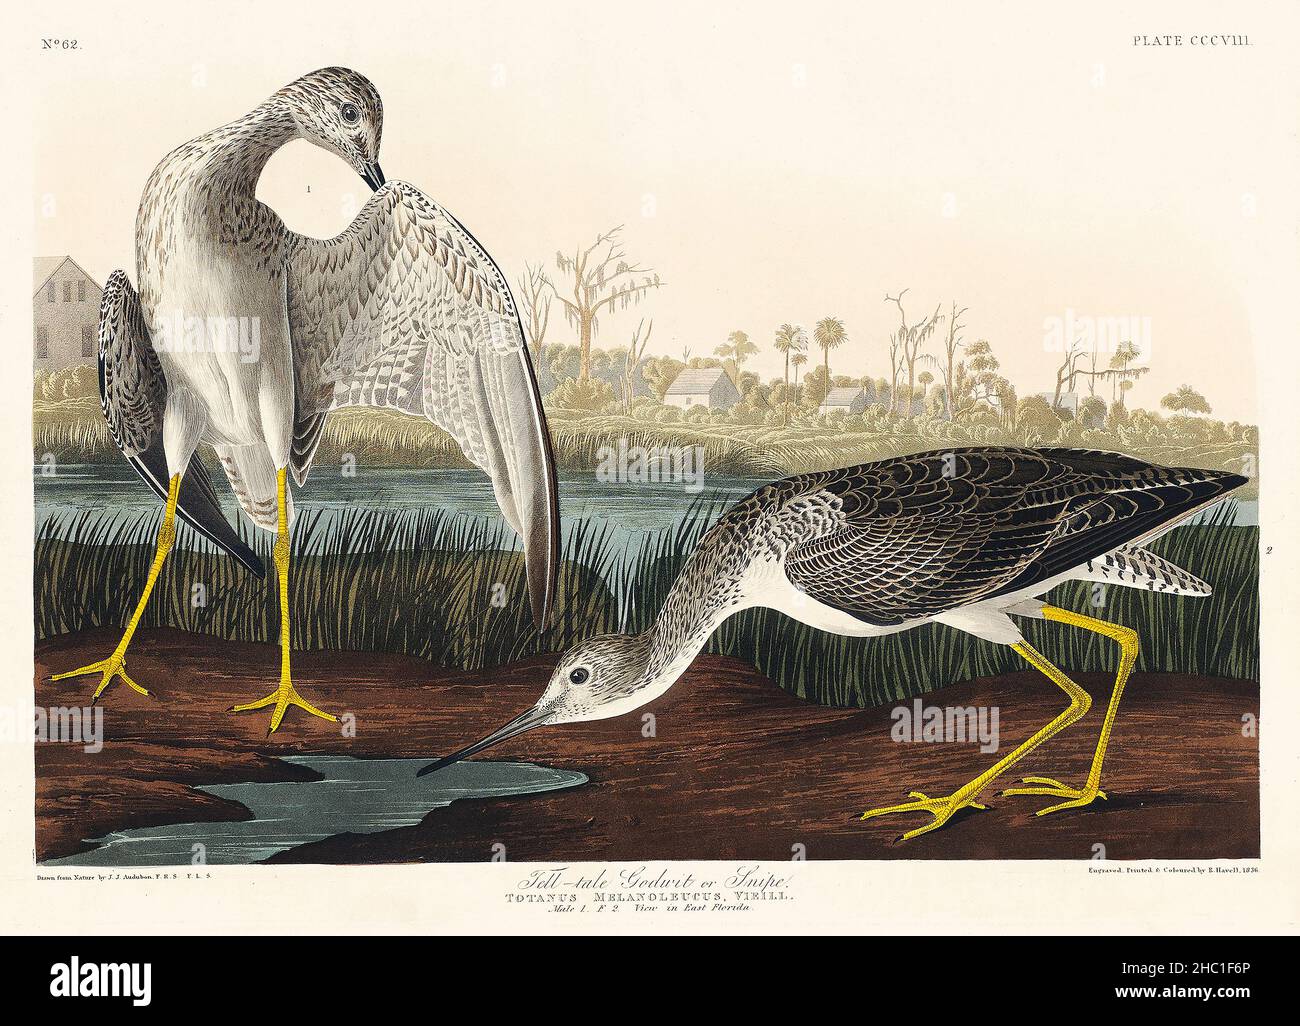 Tell-tale Godwit or Snipe from Birds of America (1827) by John James Audubon (1785 - 1851), etched by Robert Havell (1793 - 1878). Stock Photo